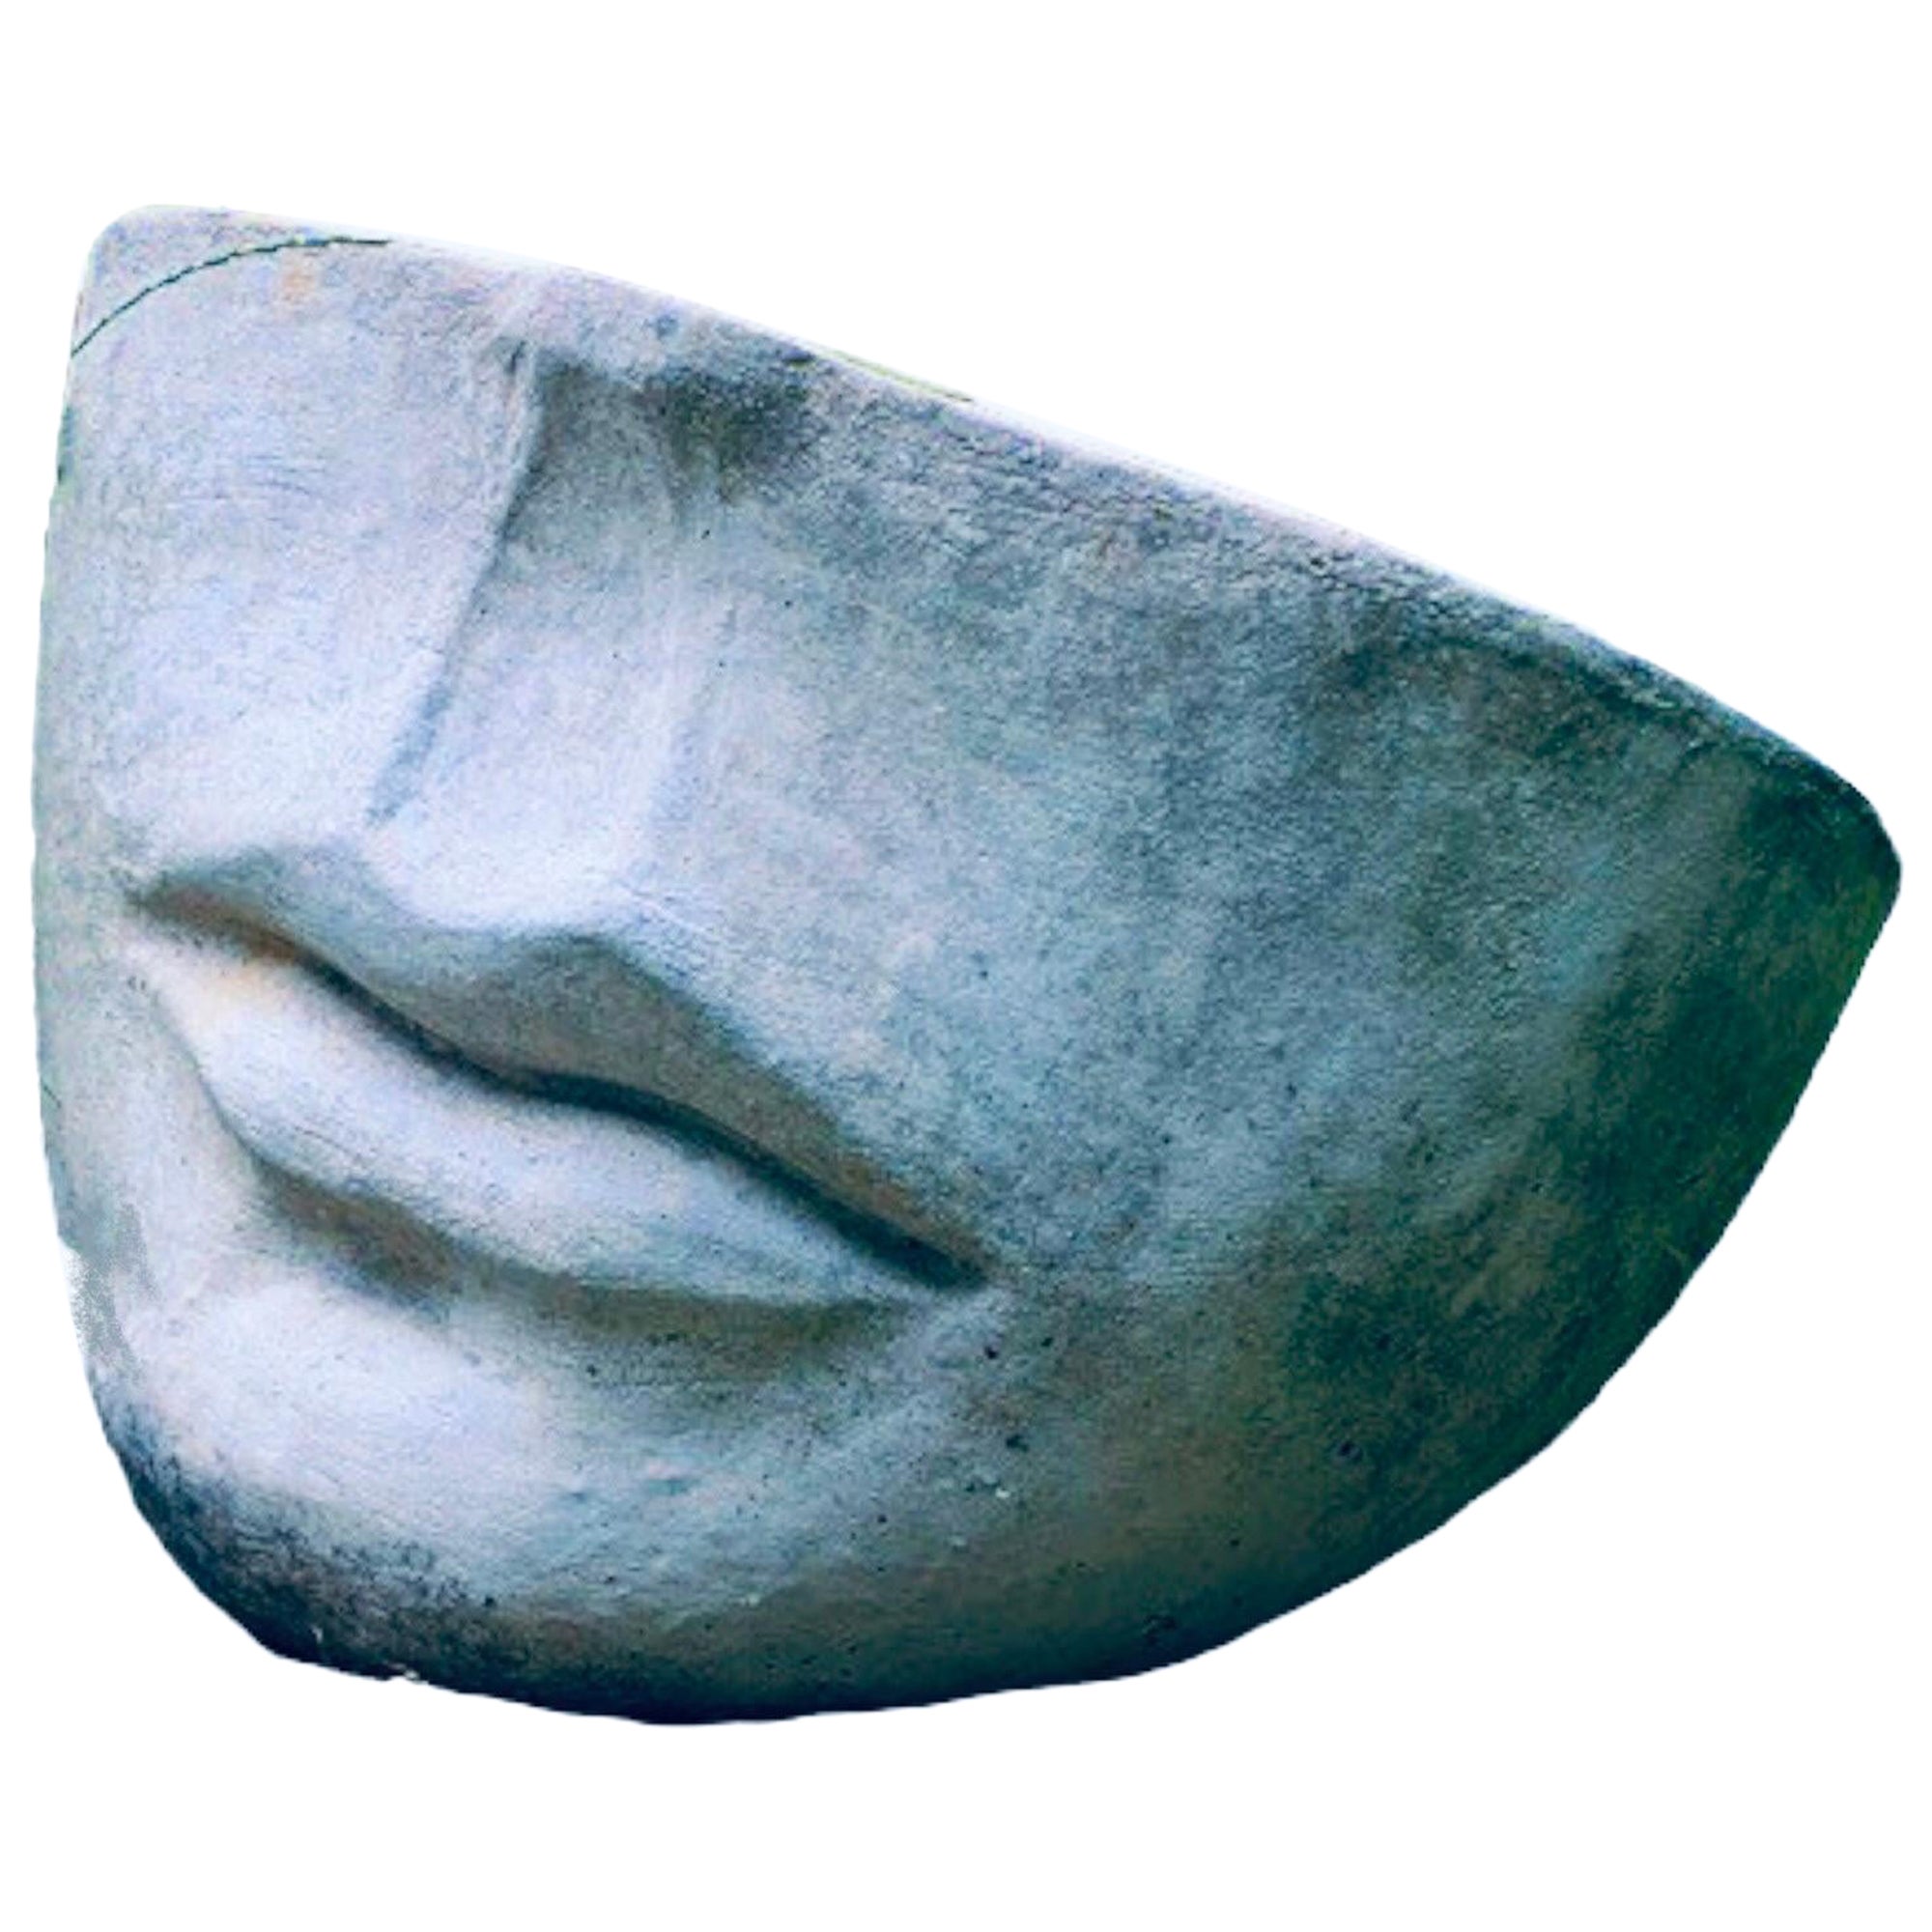 Unusual Face Planter by Nina Studios, Ca. 1980's - Extra Large Version